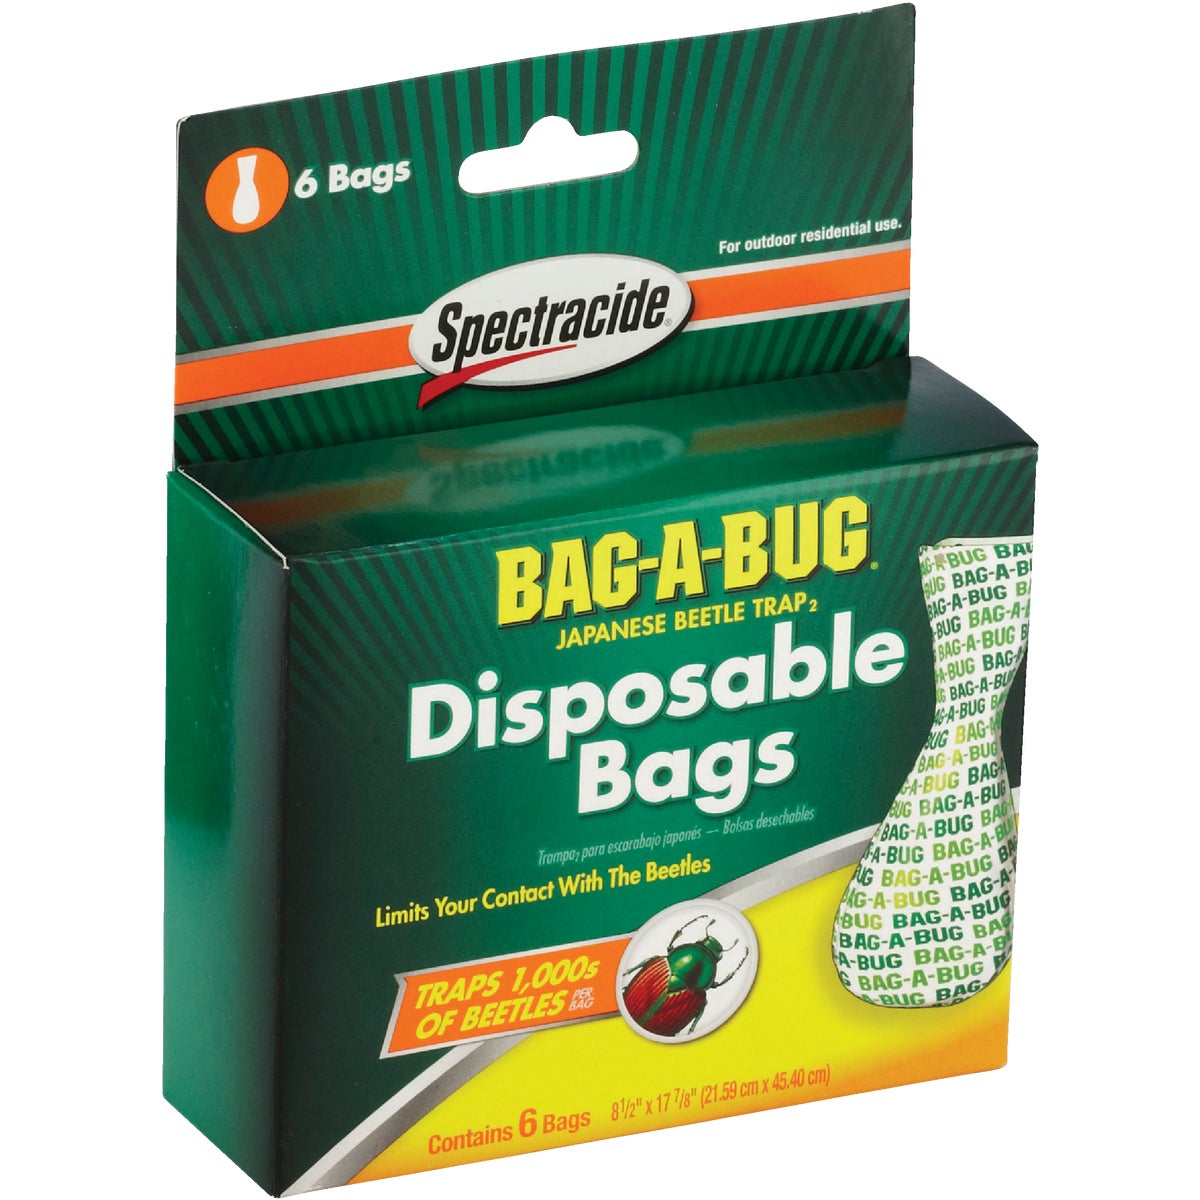 Item 719048, 6-pack replacement bags for Bag-A-Bug Japanese beetle trap.